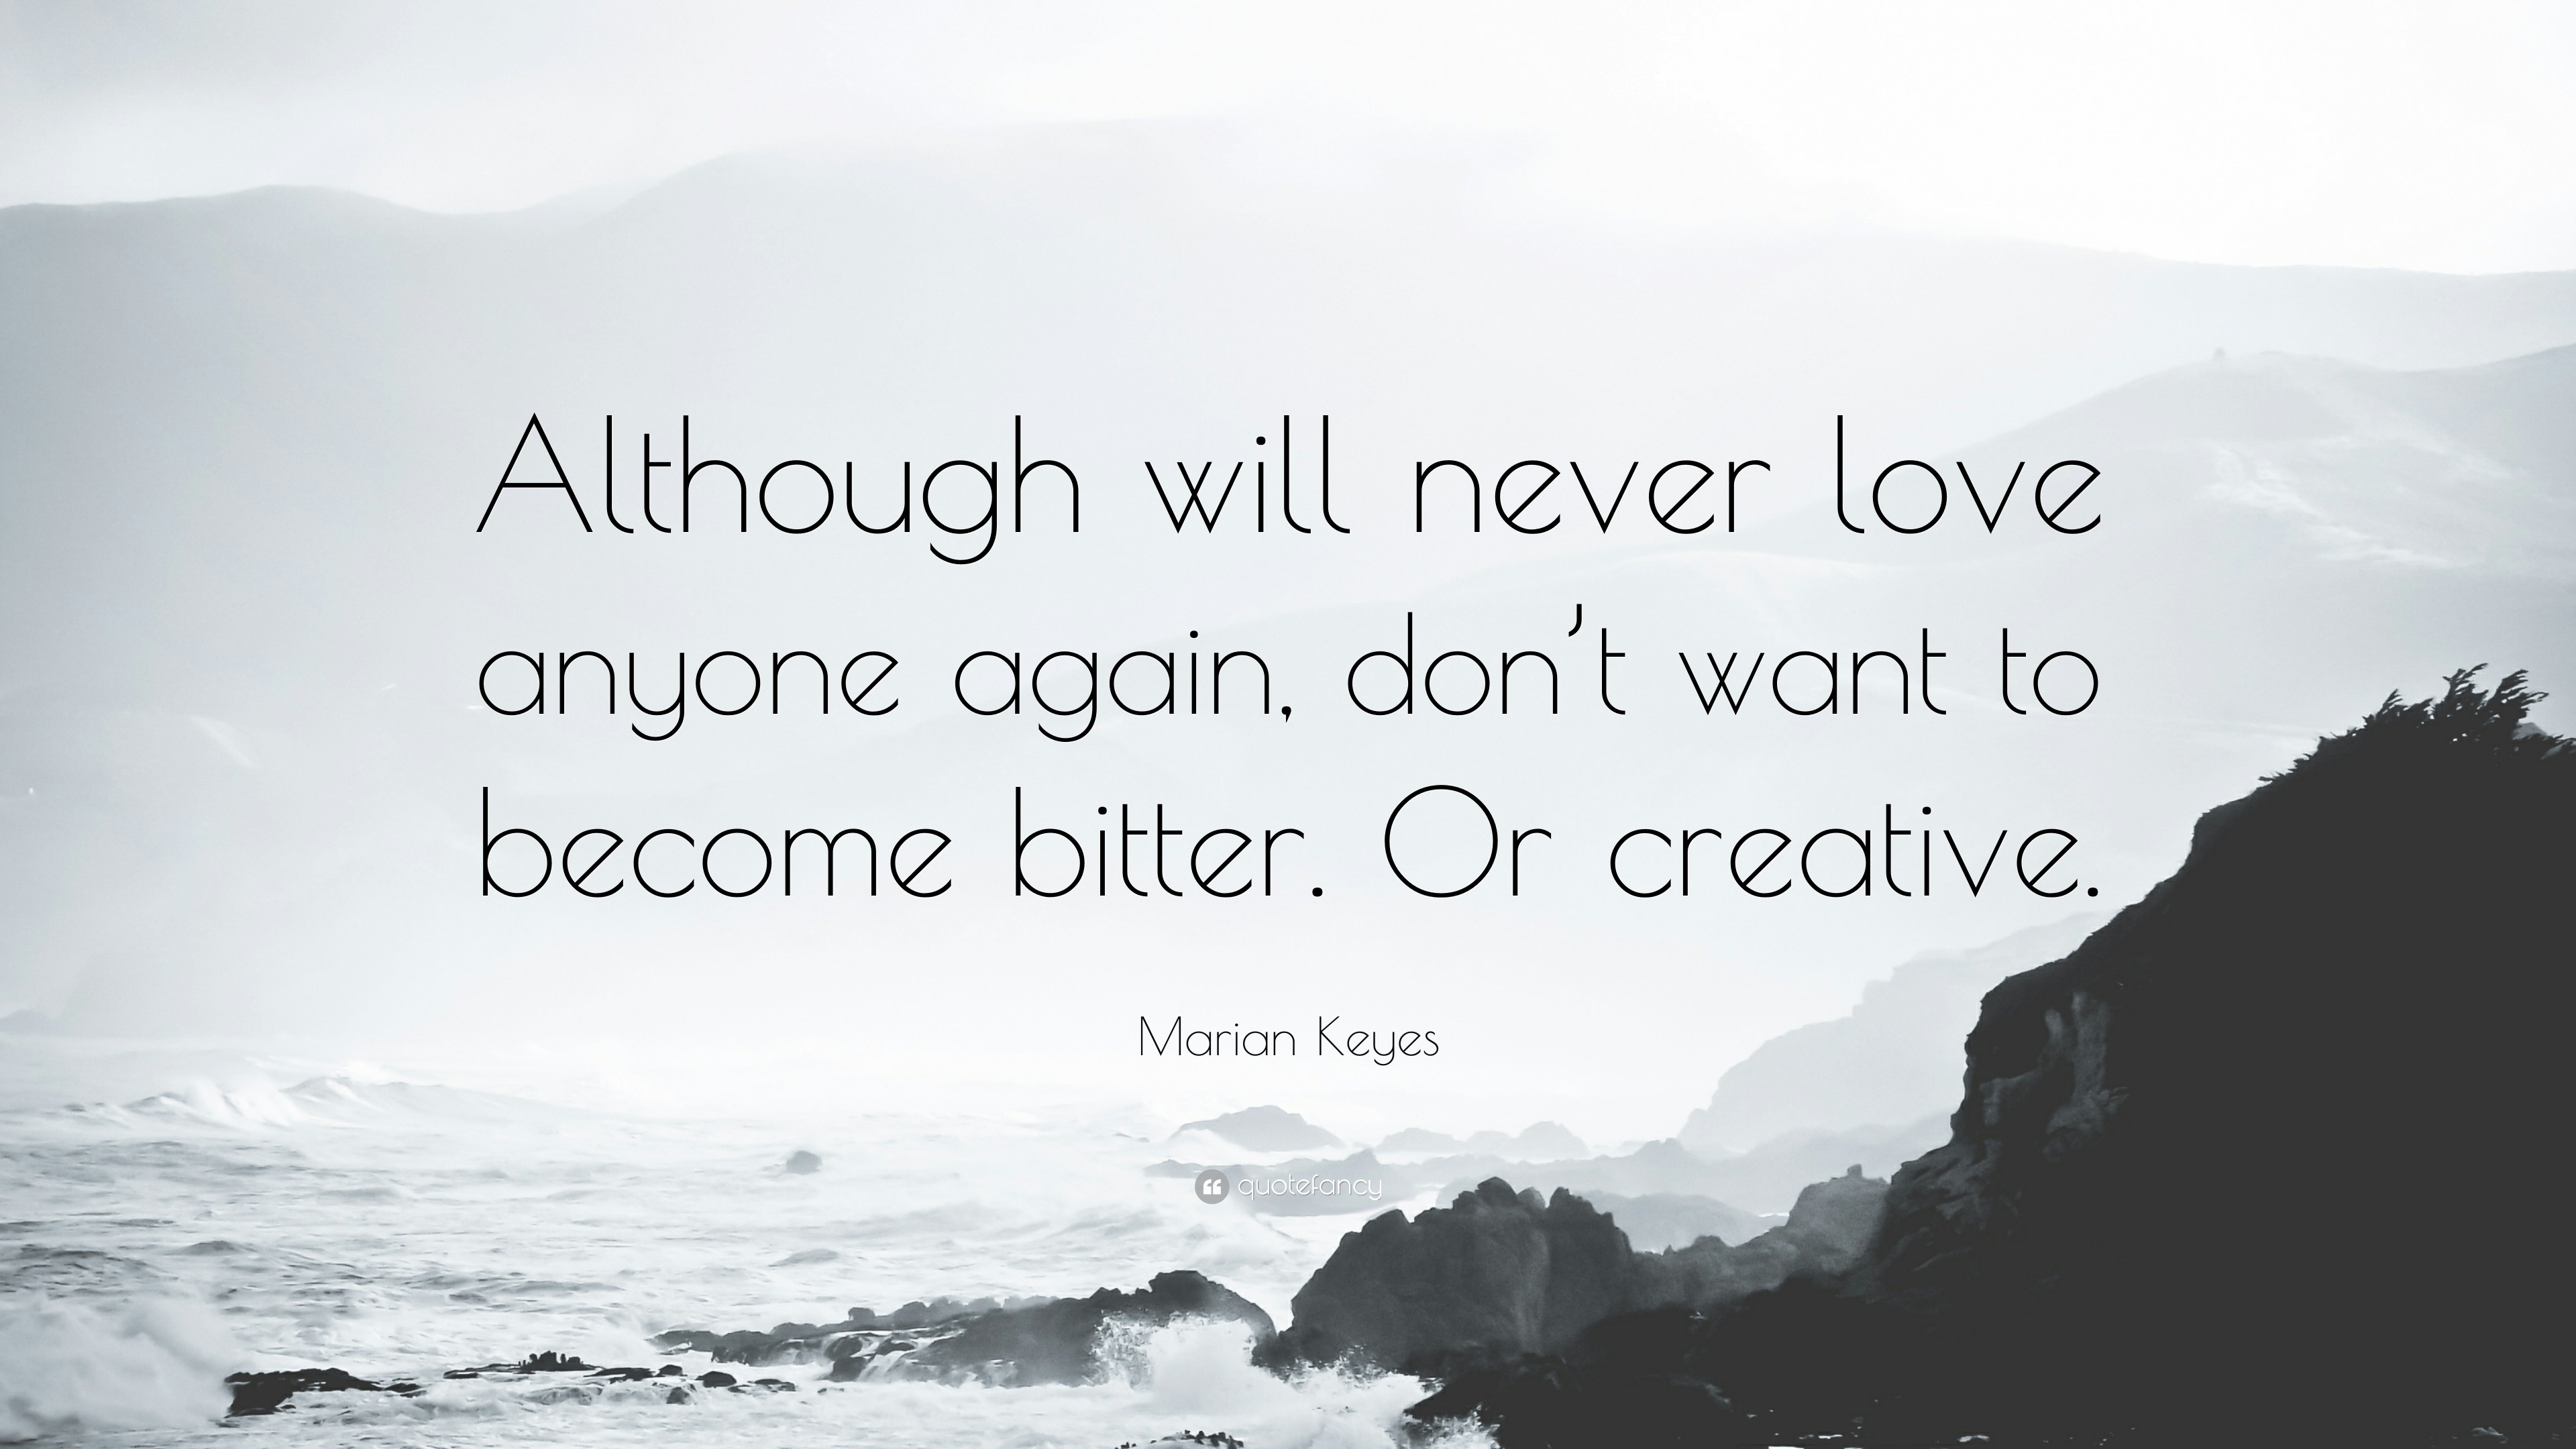 Marian Keyes Quote “Although will never love anyone again don t want